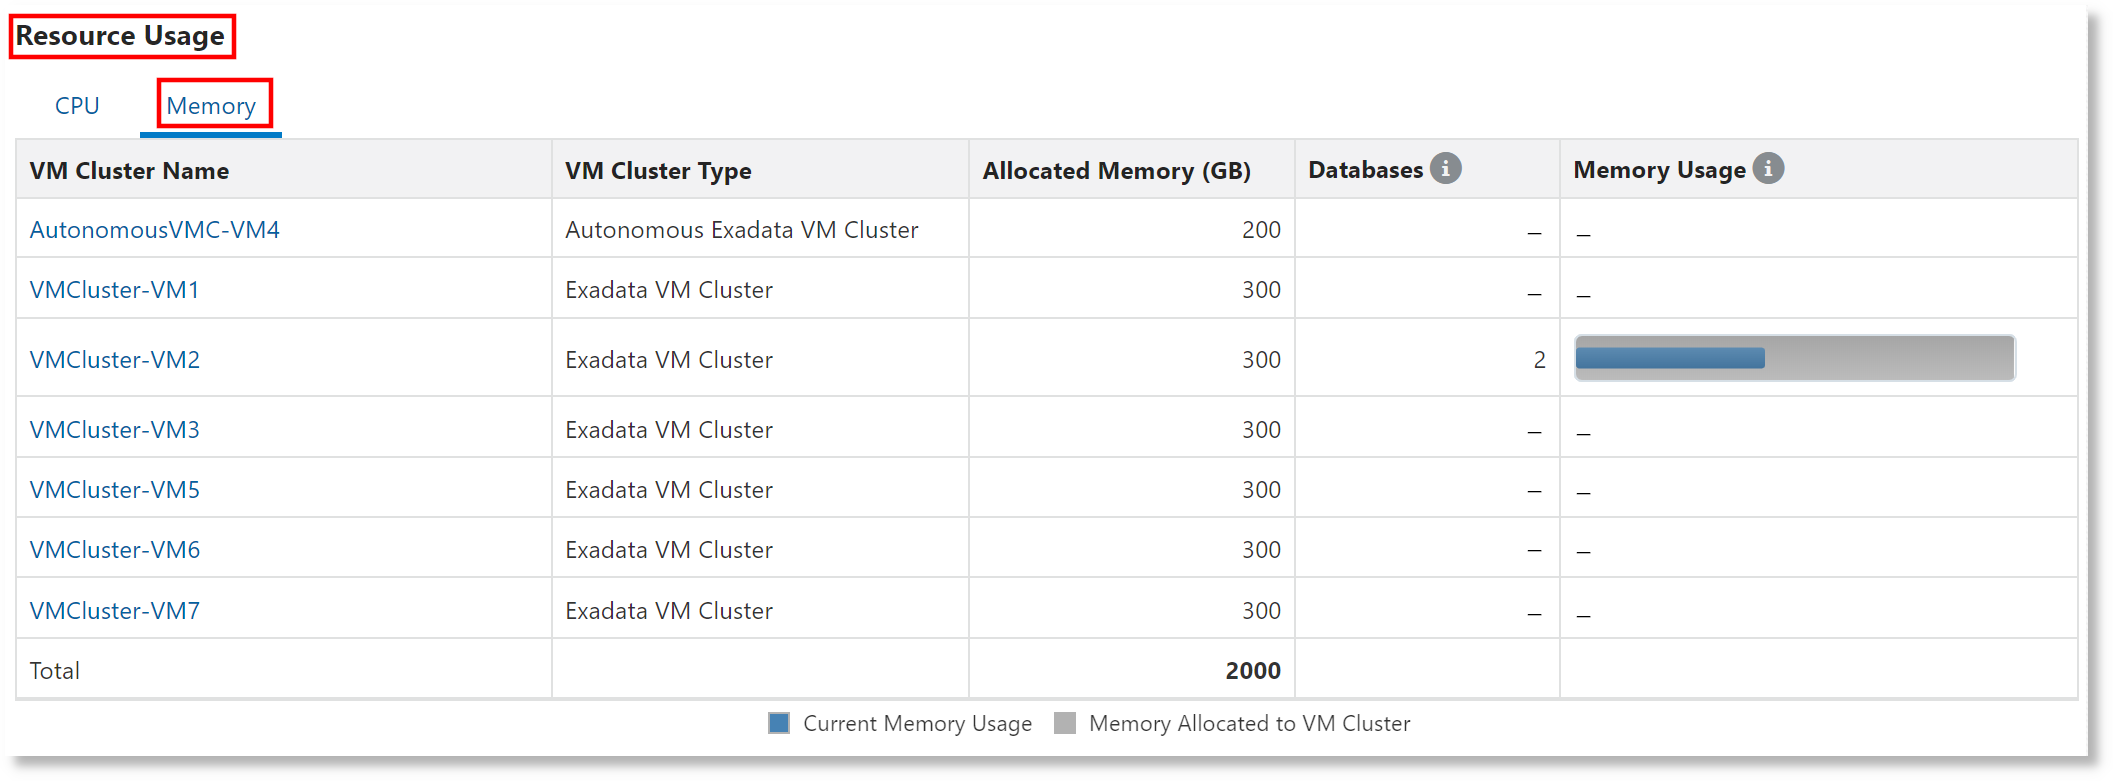 Memory Resource Usage information for Exadata Infrastructure